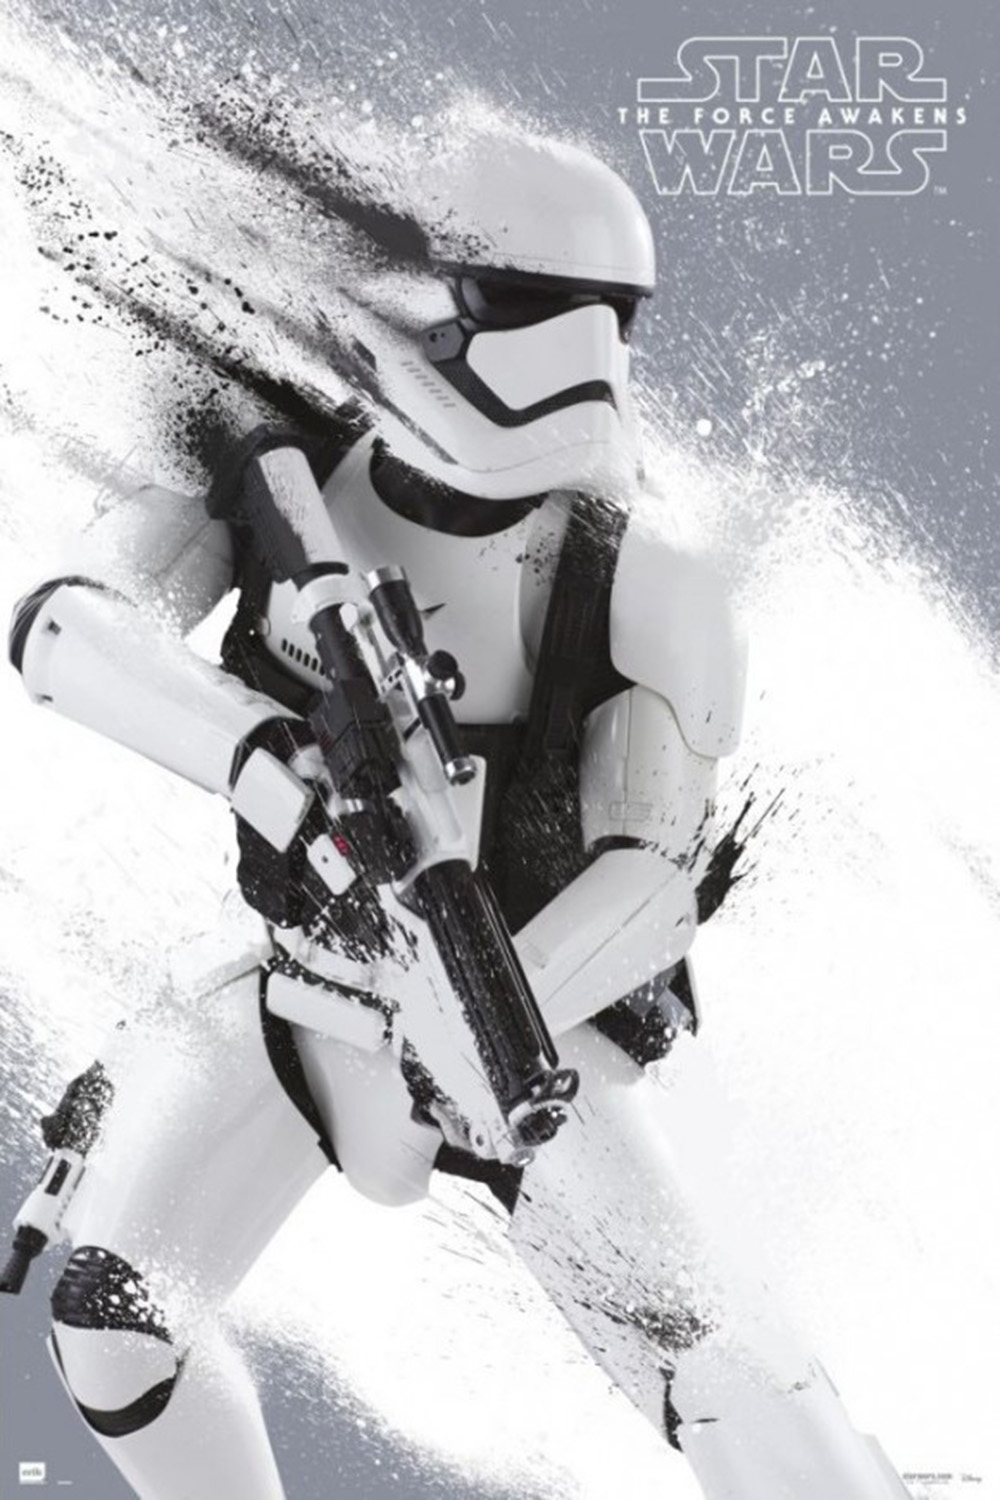 &quot;Star Wars: The Force Awakens&quot; Promo Art (Plus Opening Crawl Video